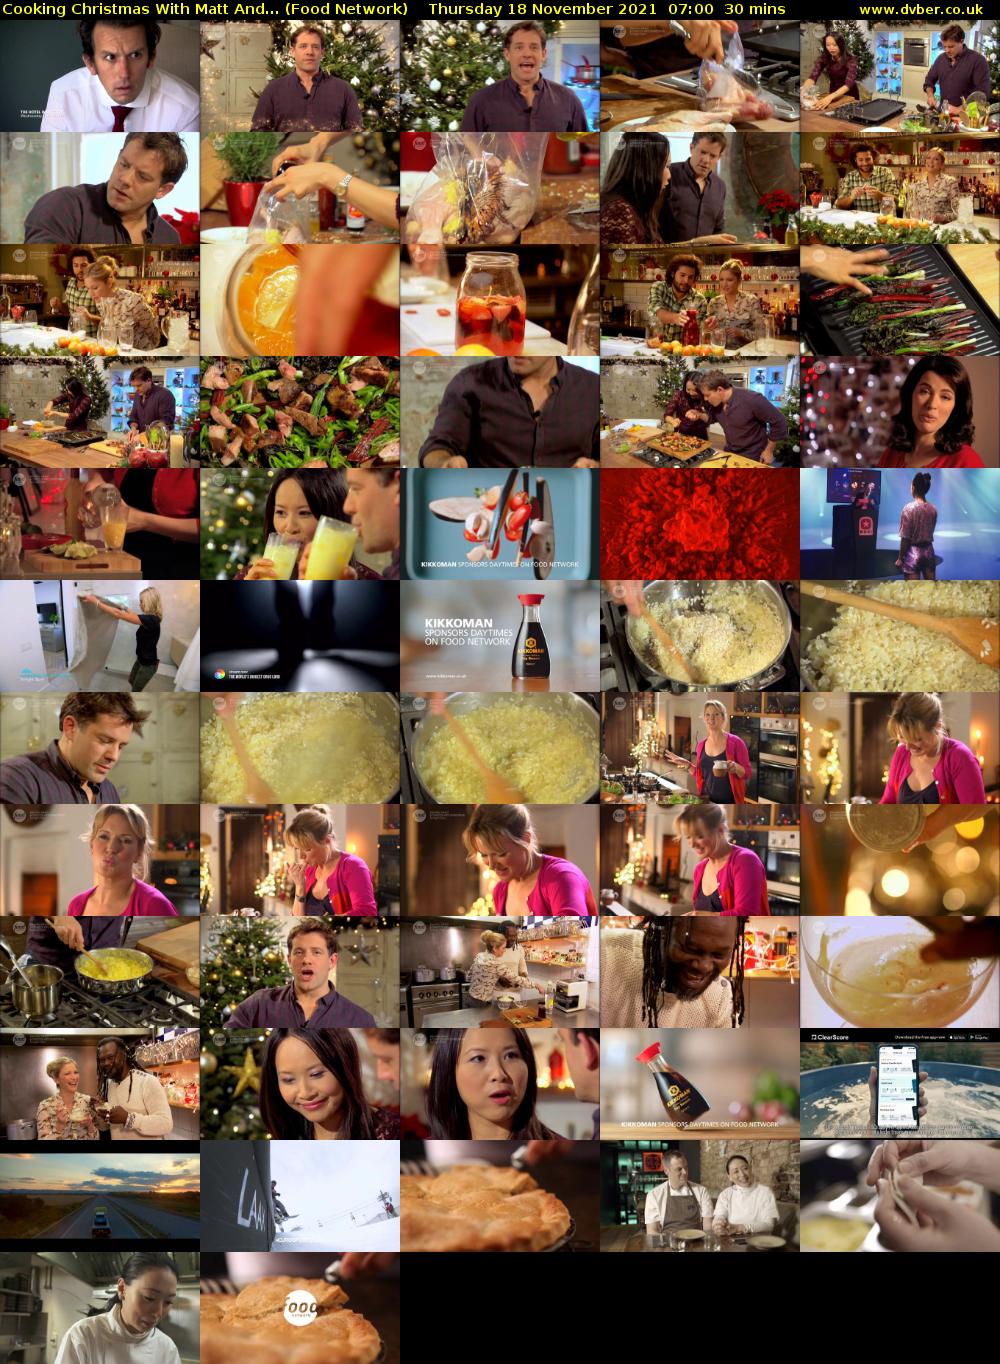 Cooking Christmas With Matt And... (Food Network) Thursday 18 November 2021 07:00 - 07:30